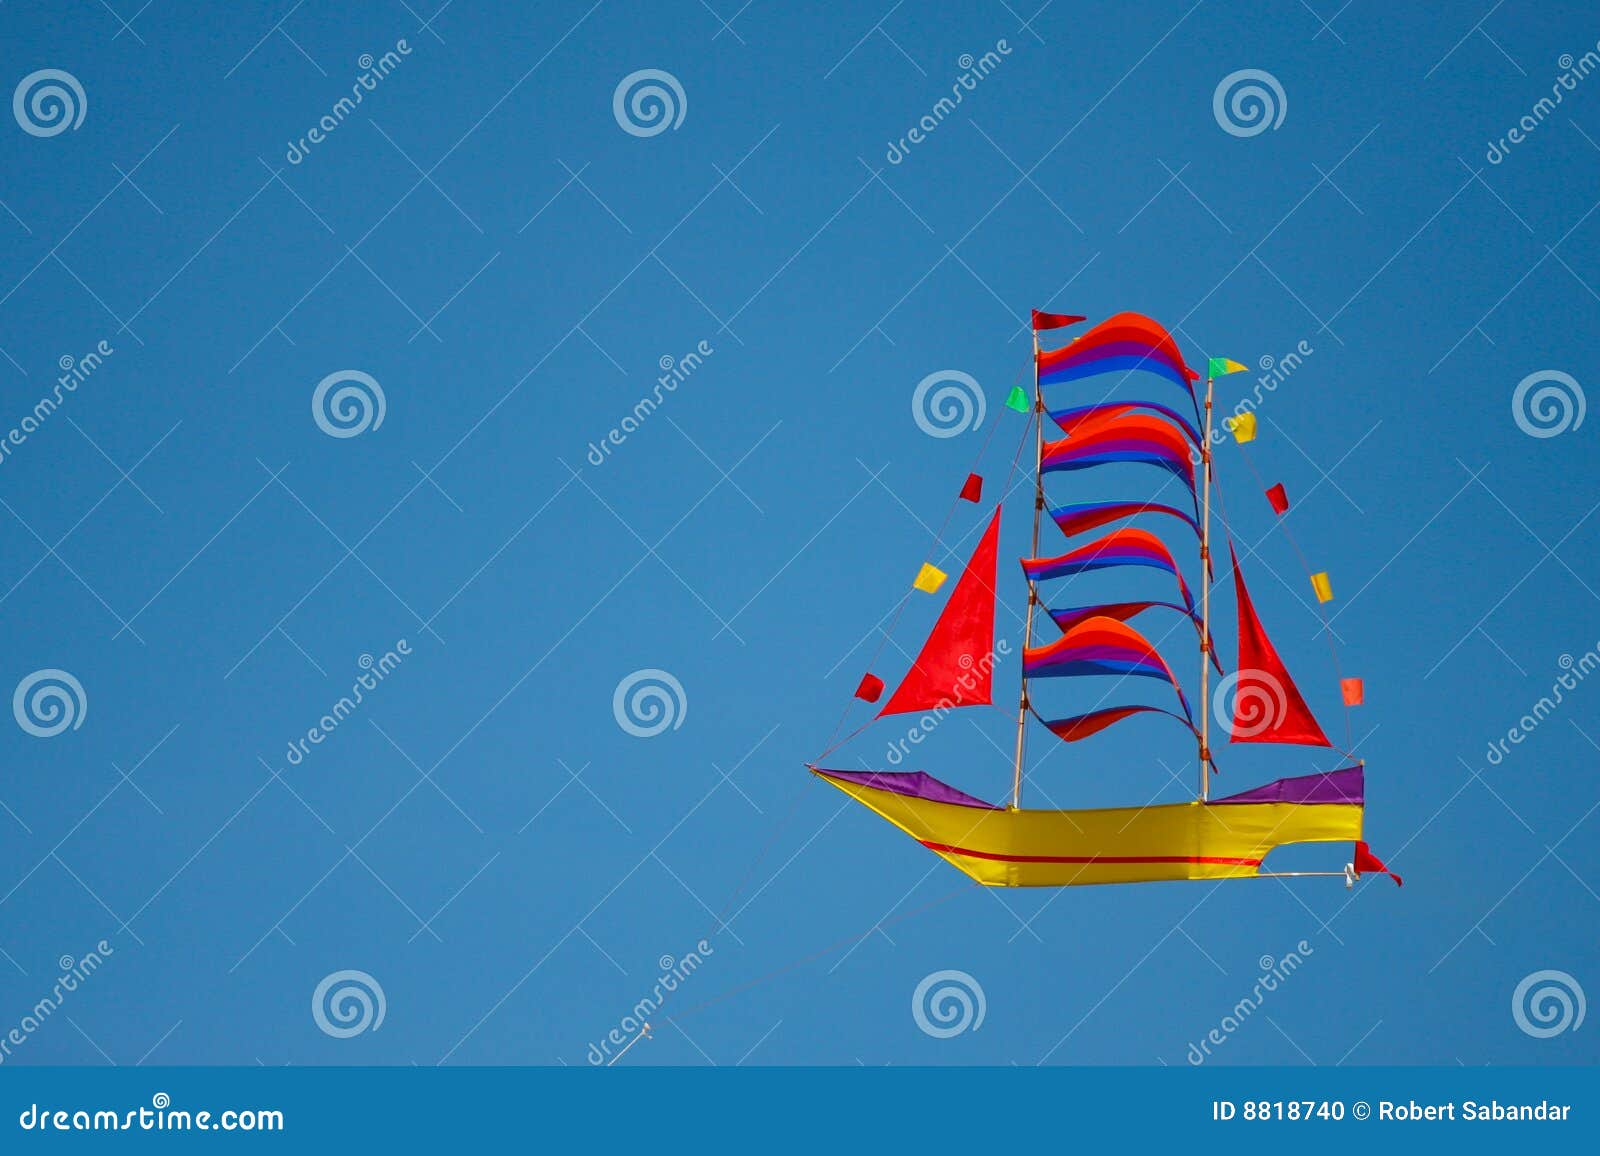 Kite in the shape of boat stock photo. Image of colorful ...